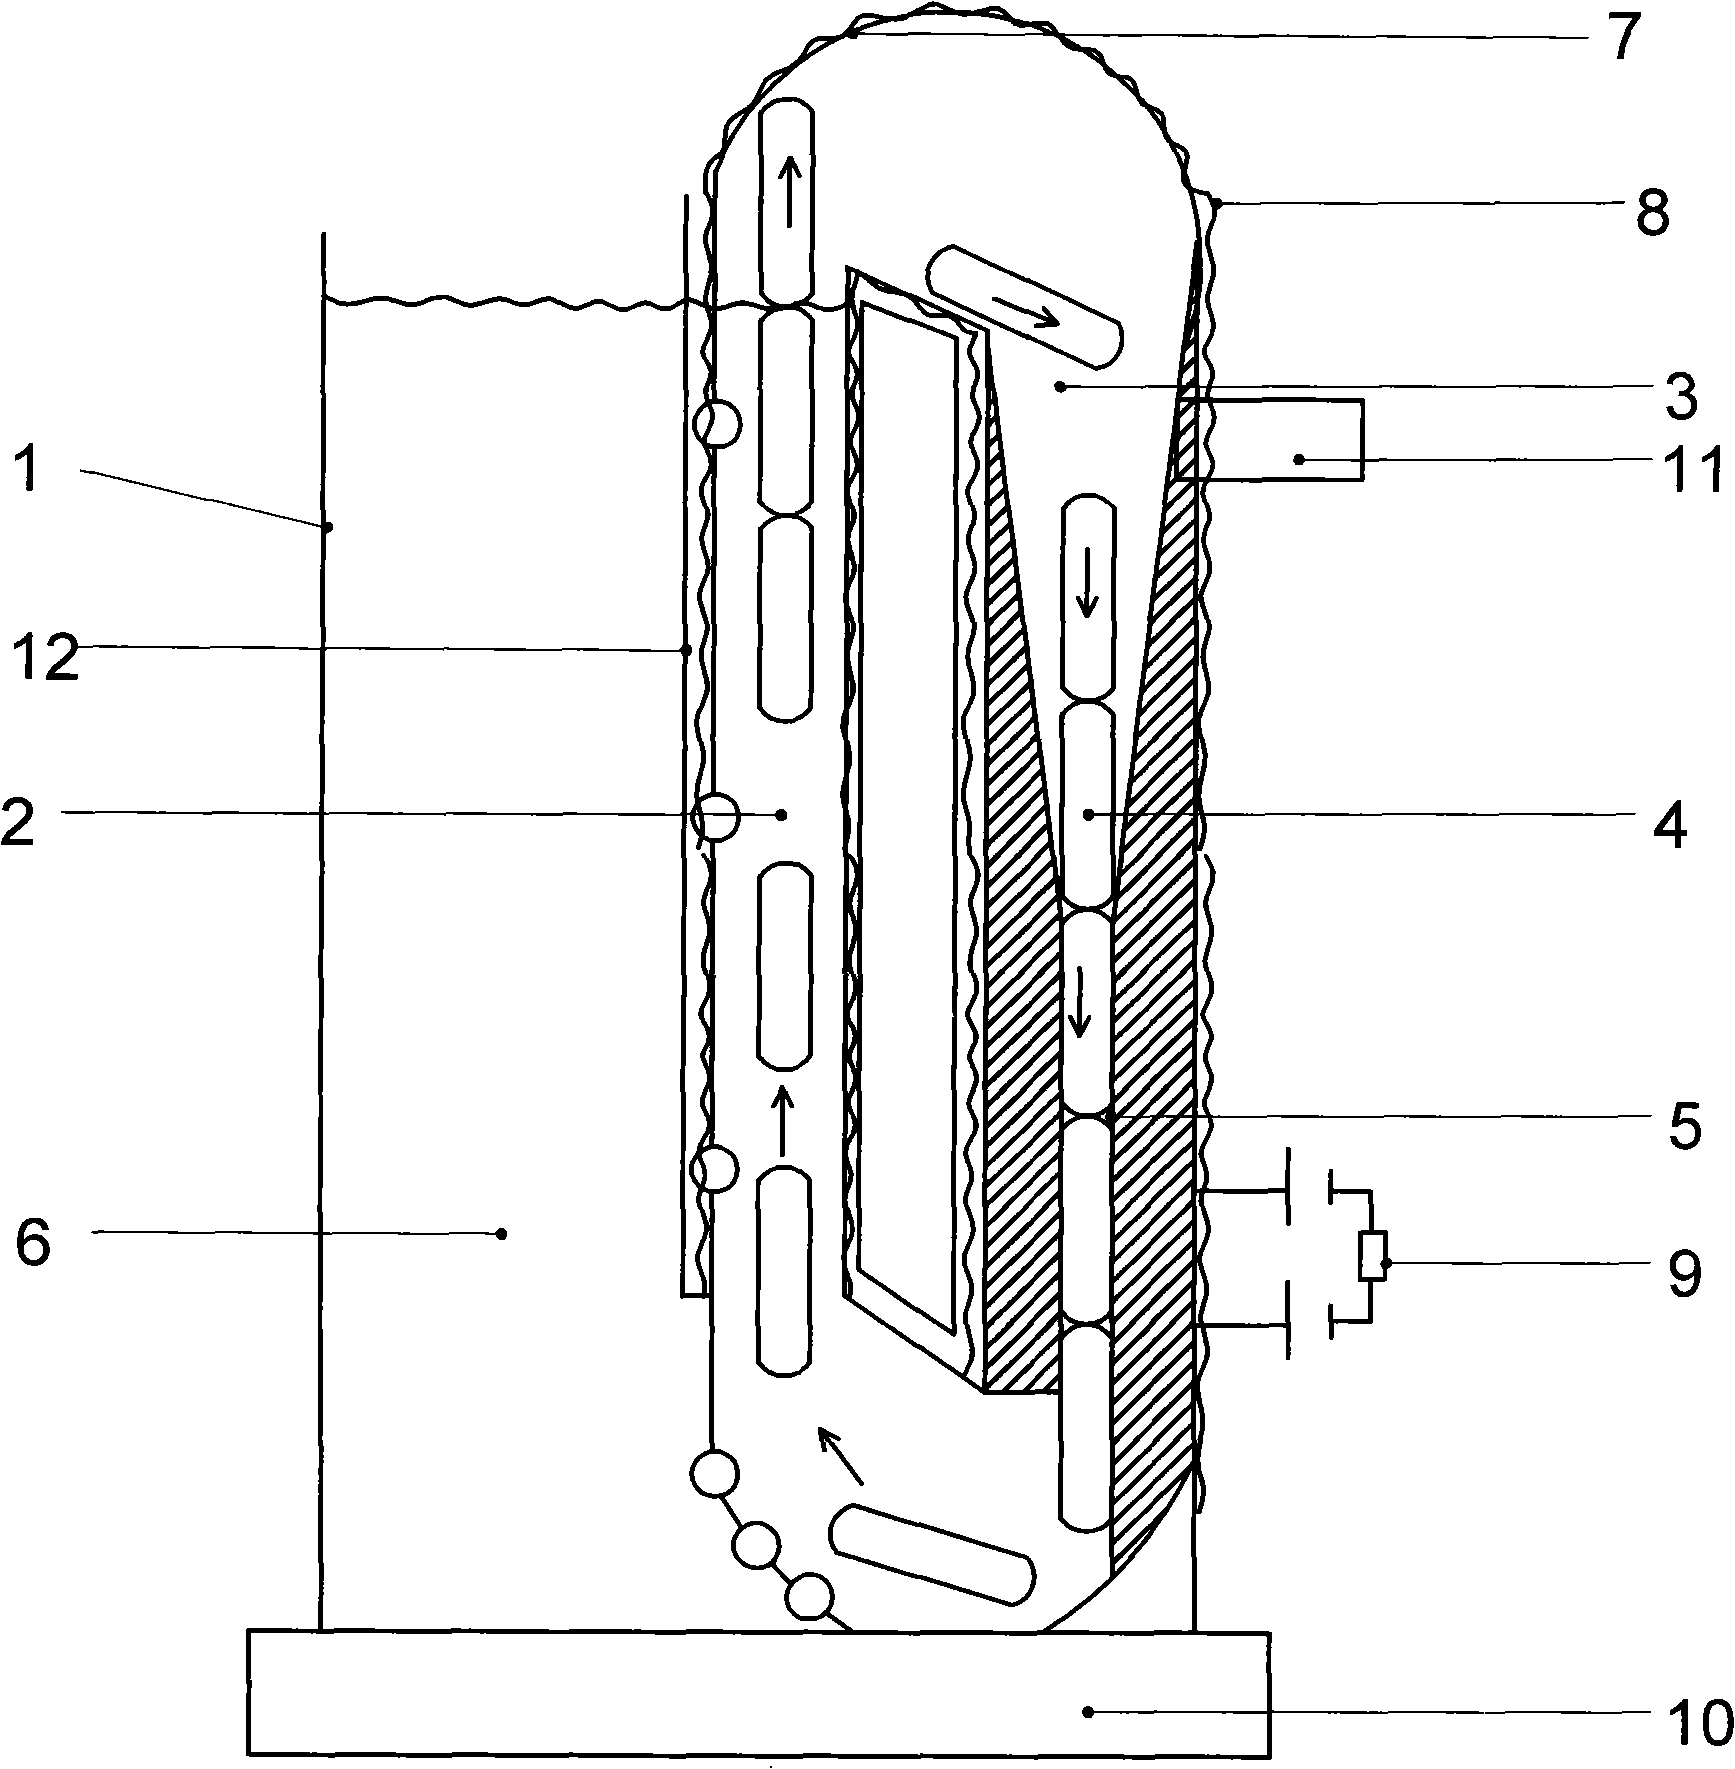 Gravity-buoyancy continuous-circulating generator with buoy-type piston